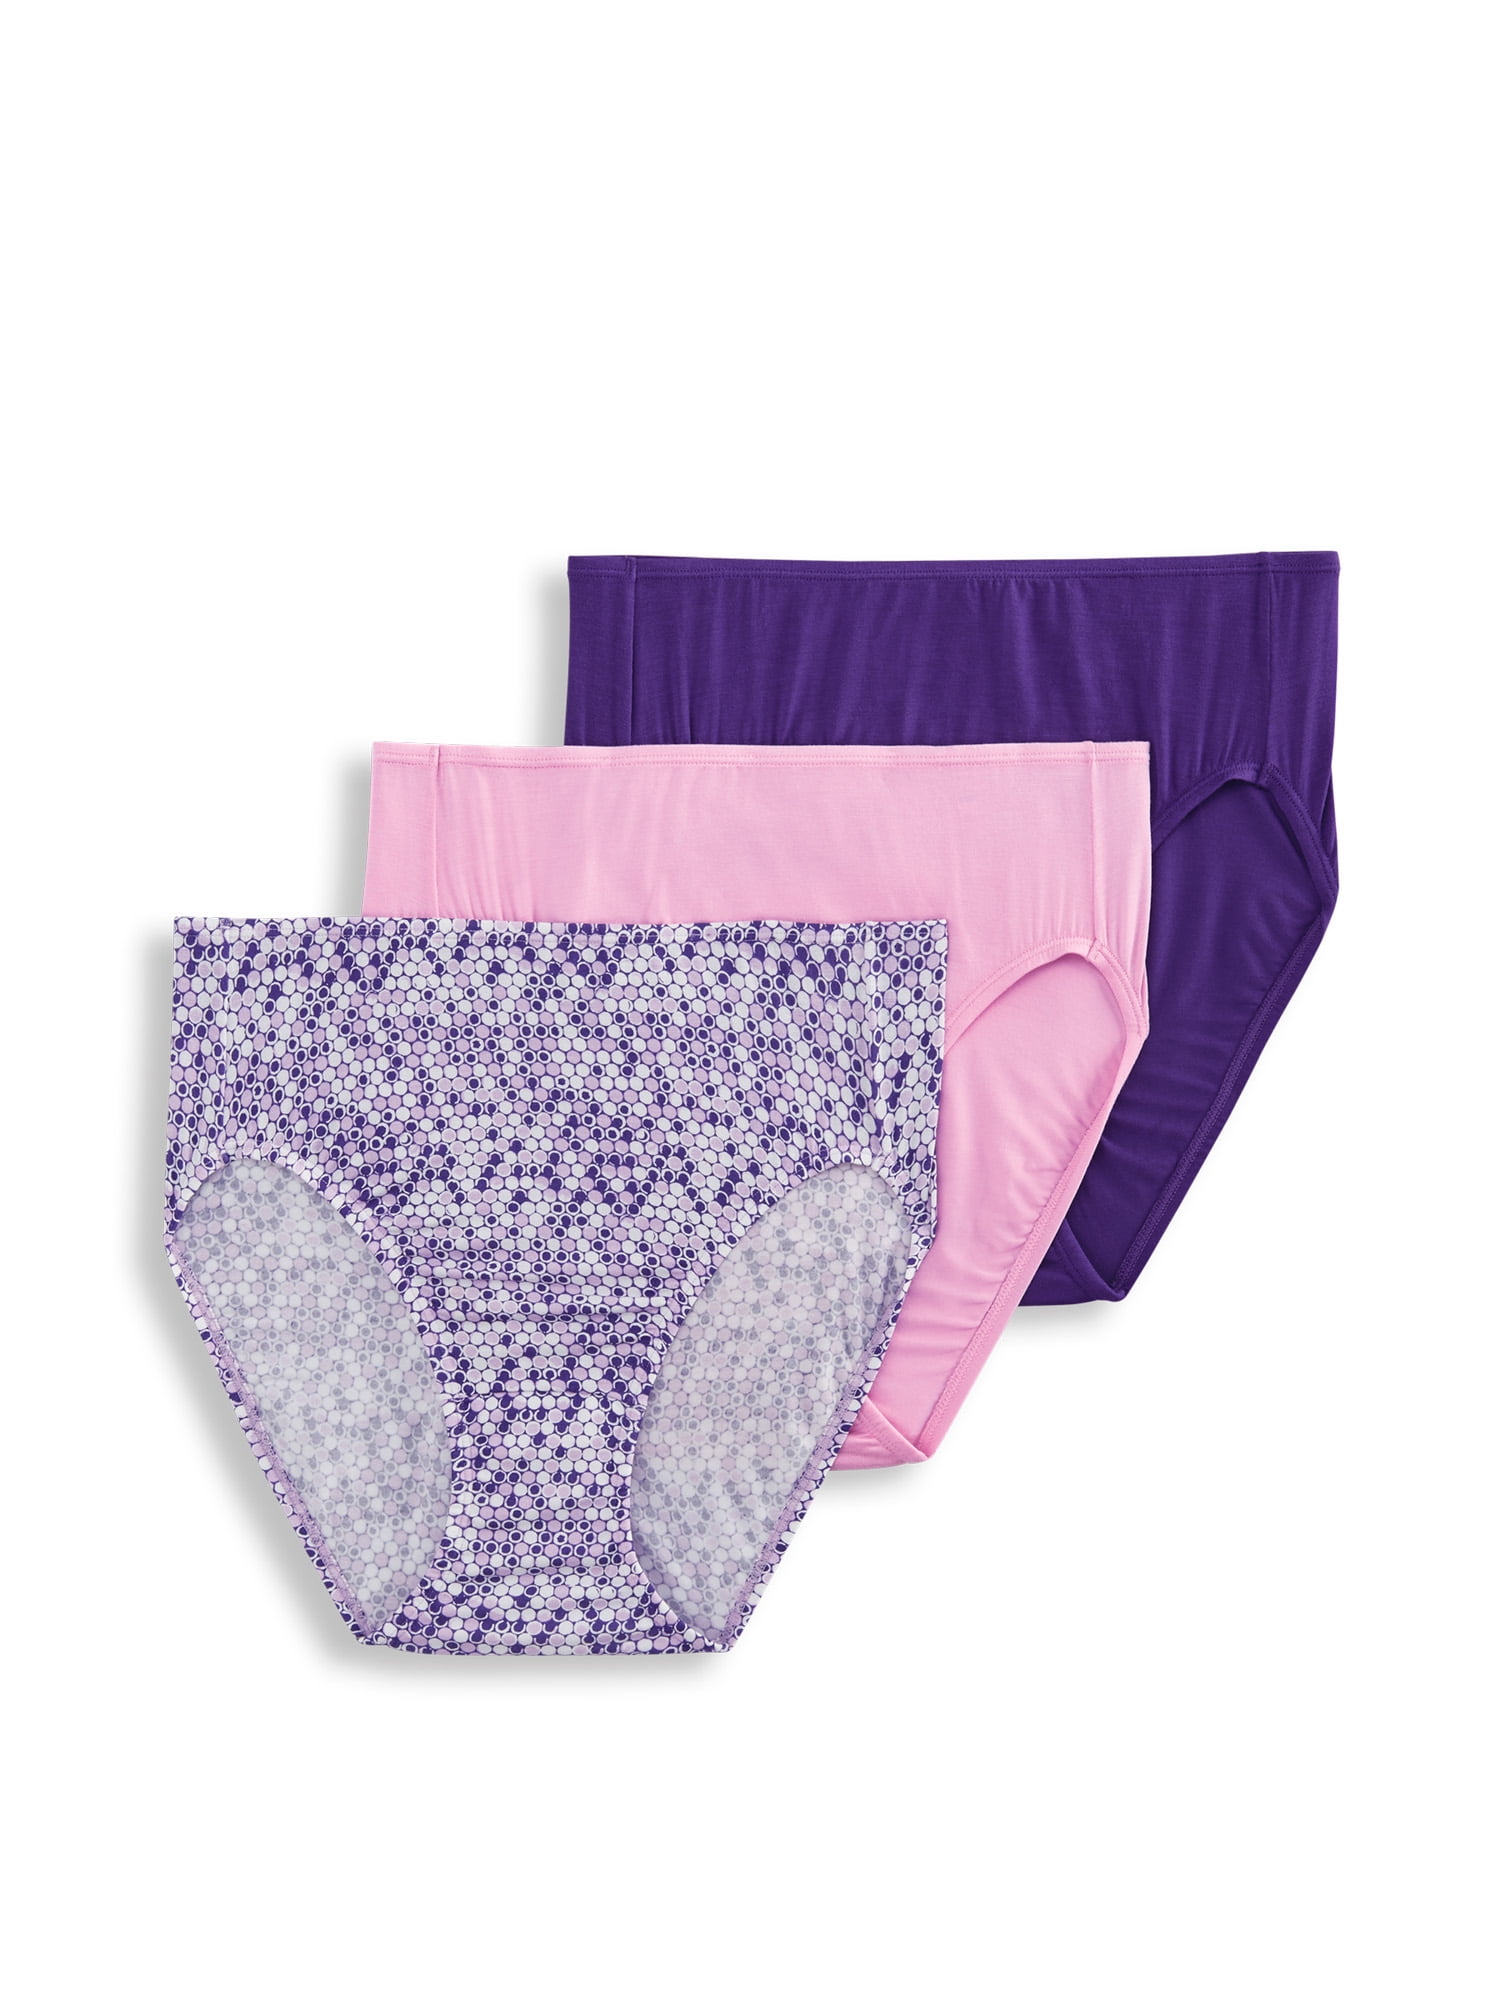 Jockey Modal Stretch Supersoft French Cut Pantie 3 Pack Style